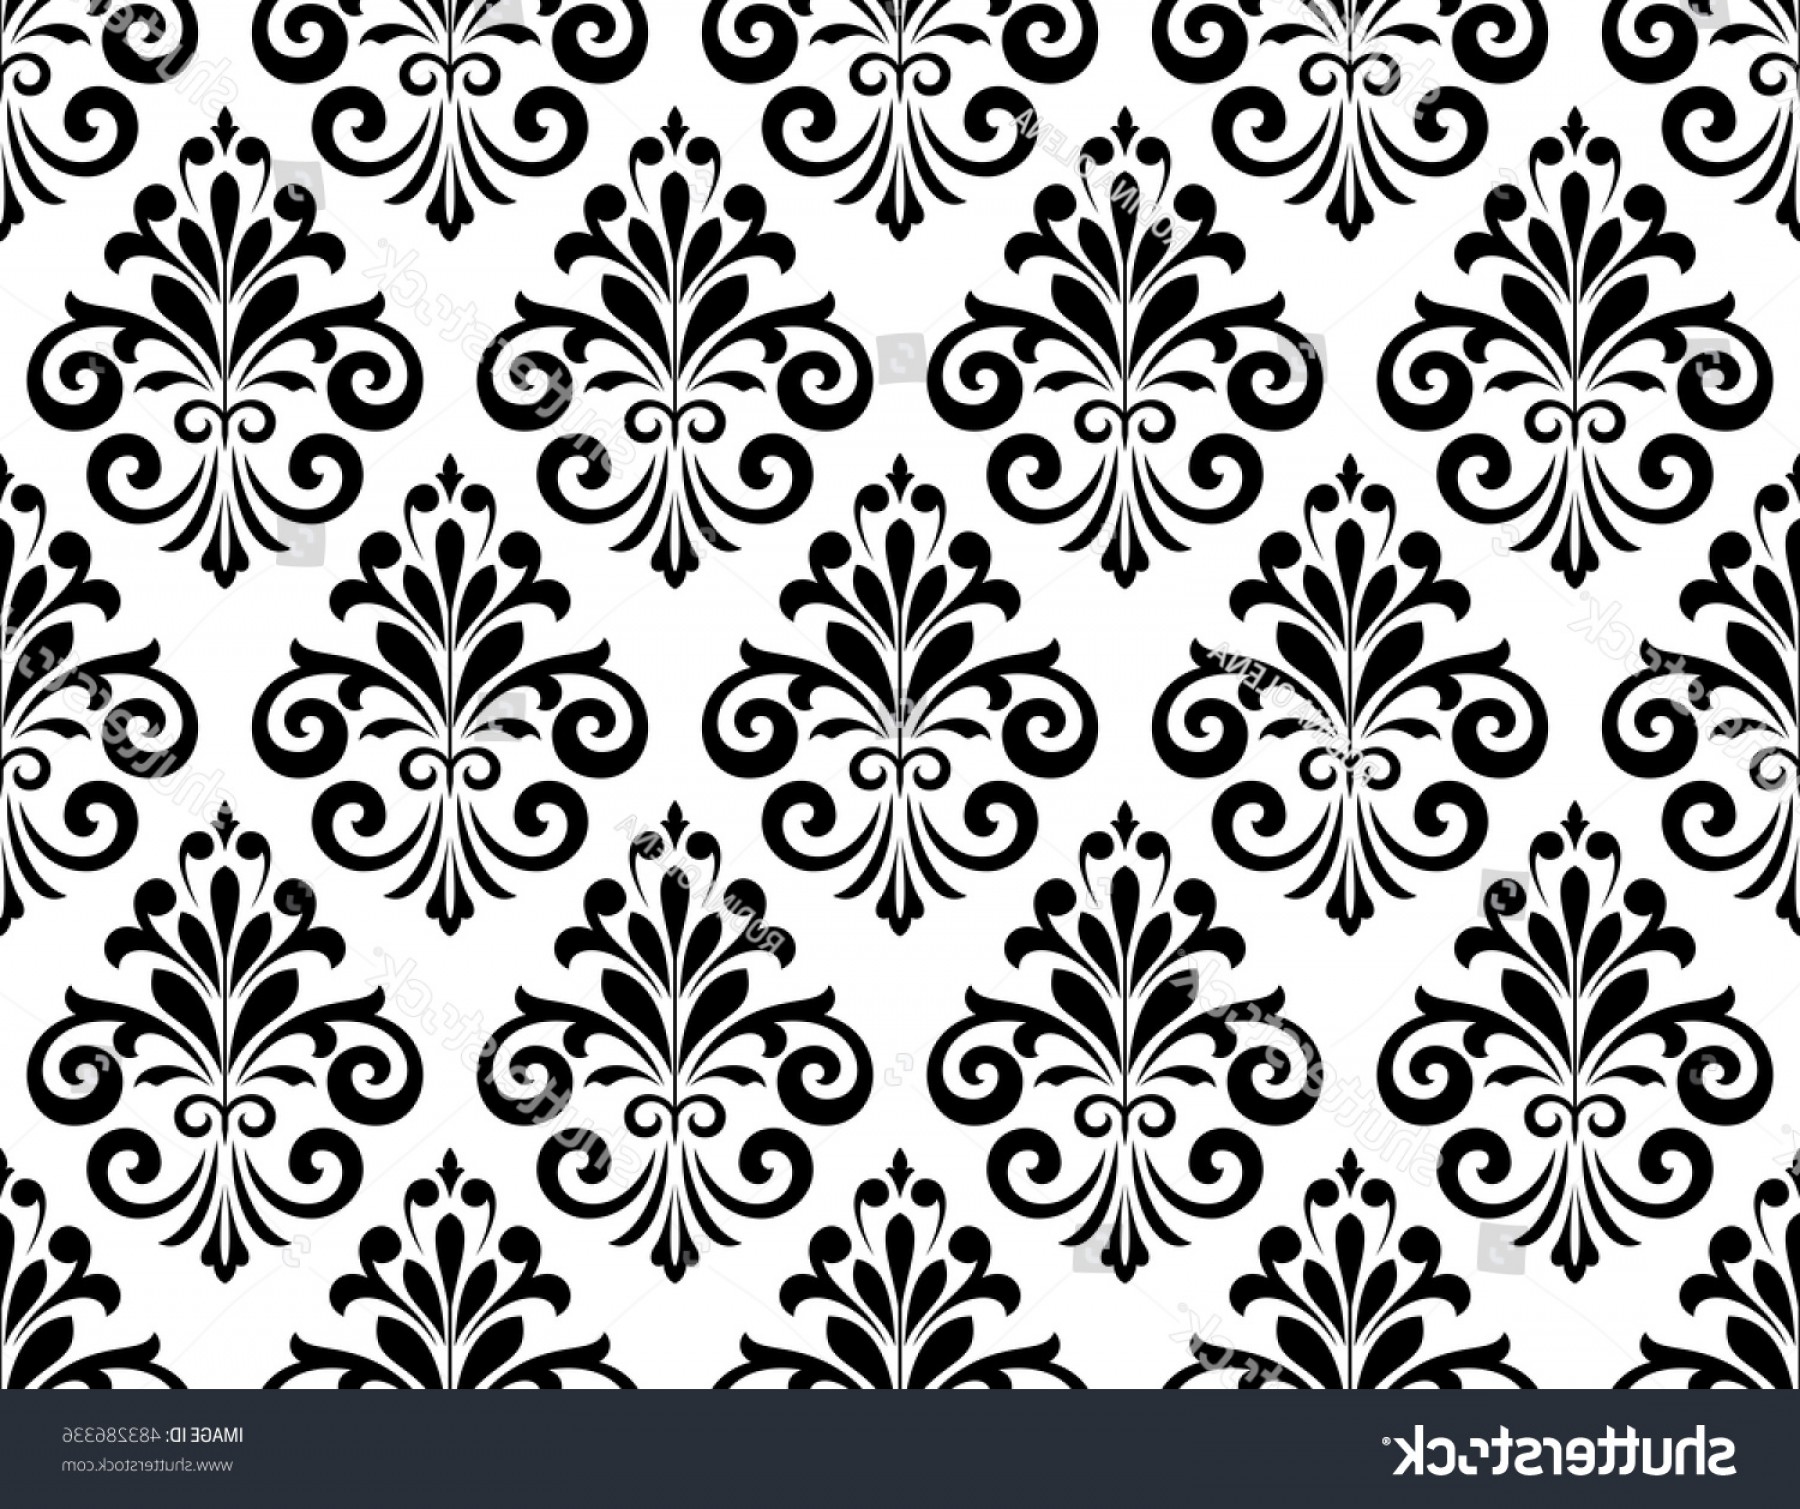 Valentines Vector Name - High Resolution Floral Vector Background - HD Wallpaper 